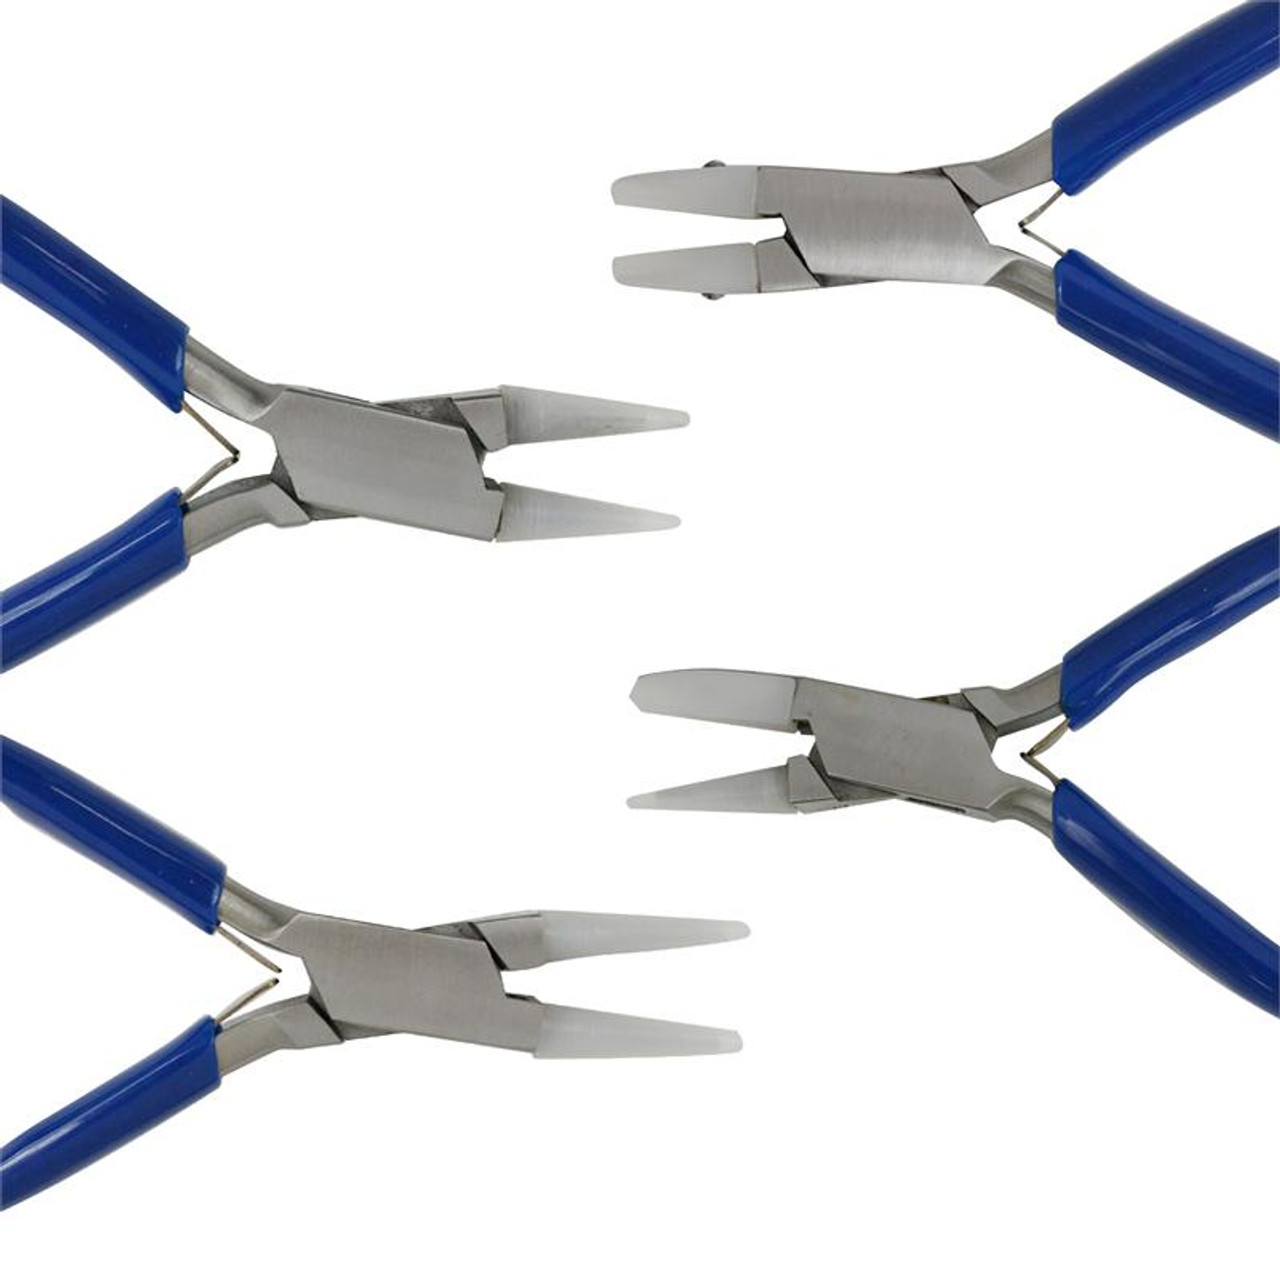 Pliers - Nylon Jaw Tapered